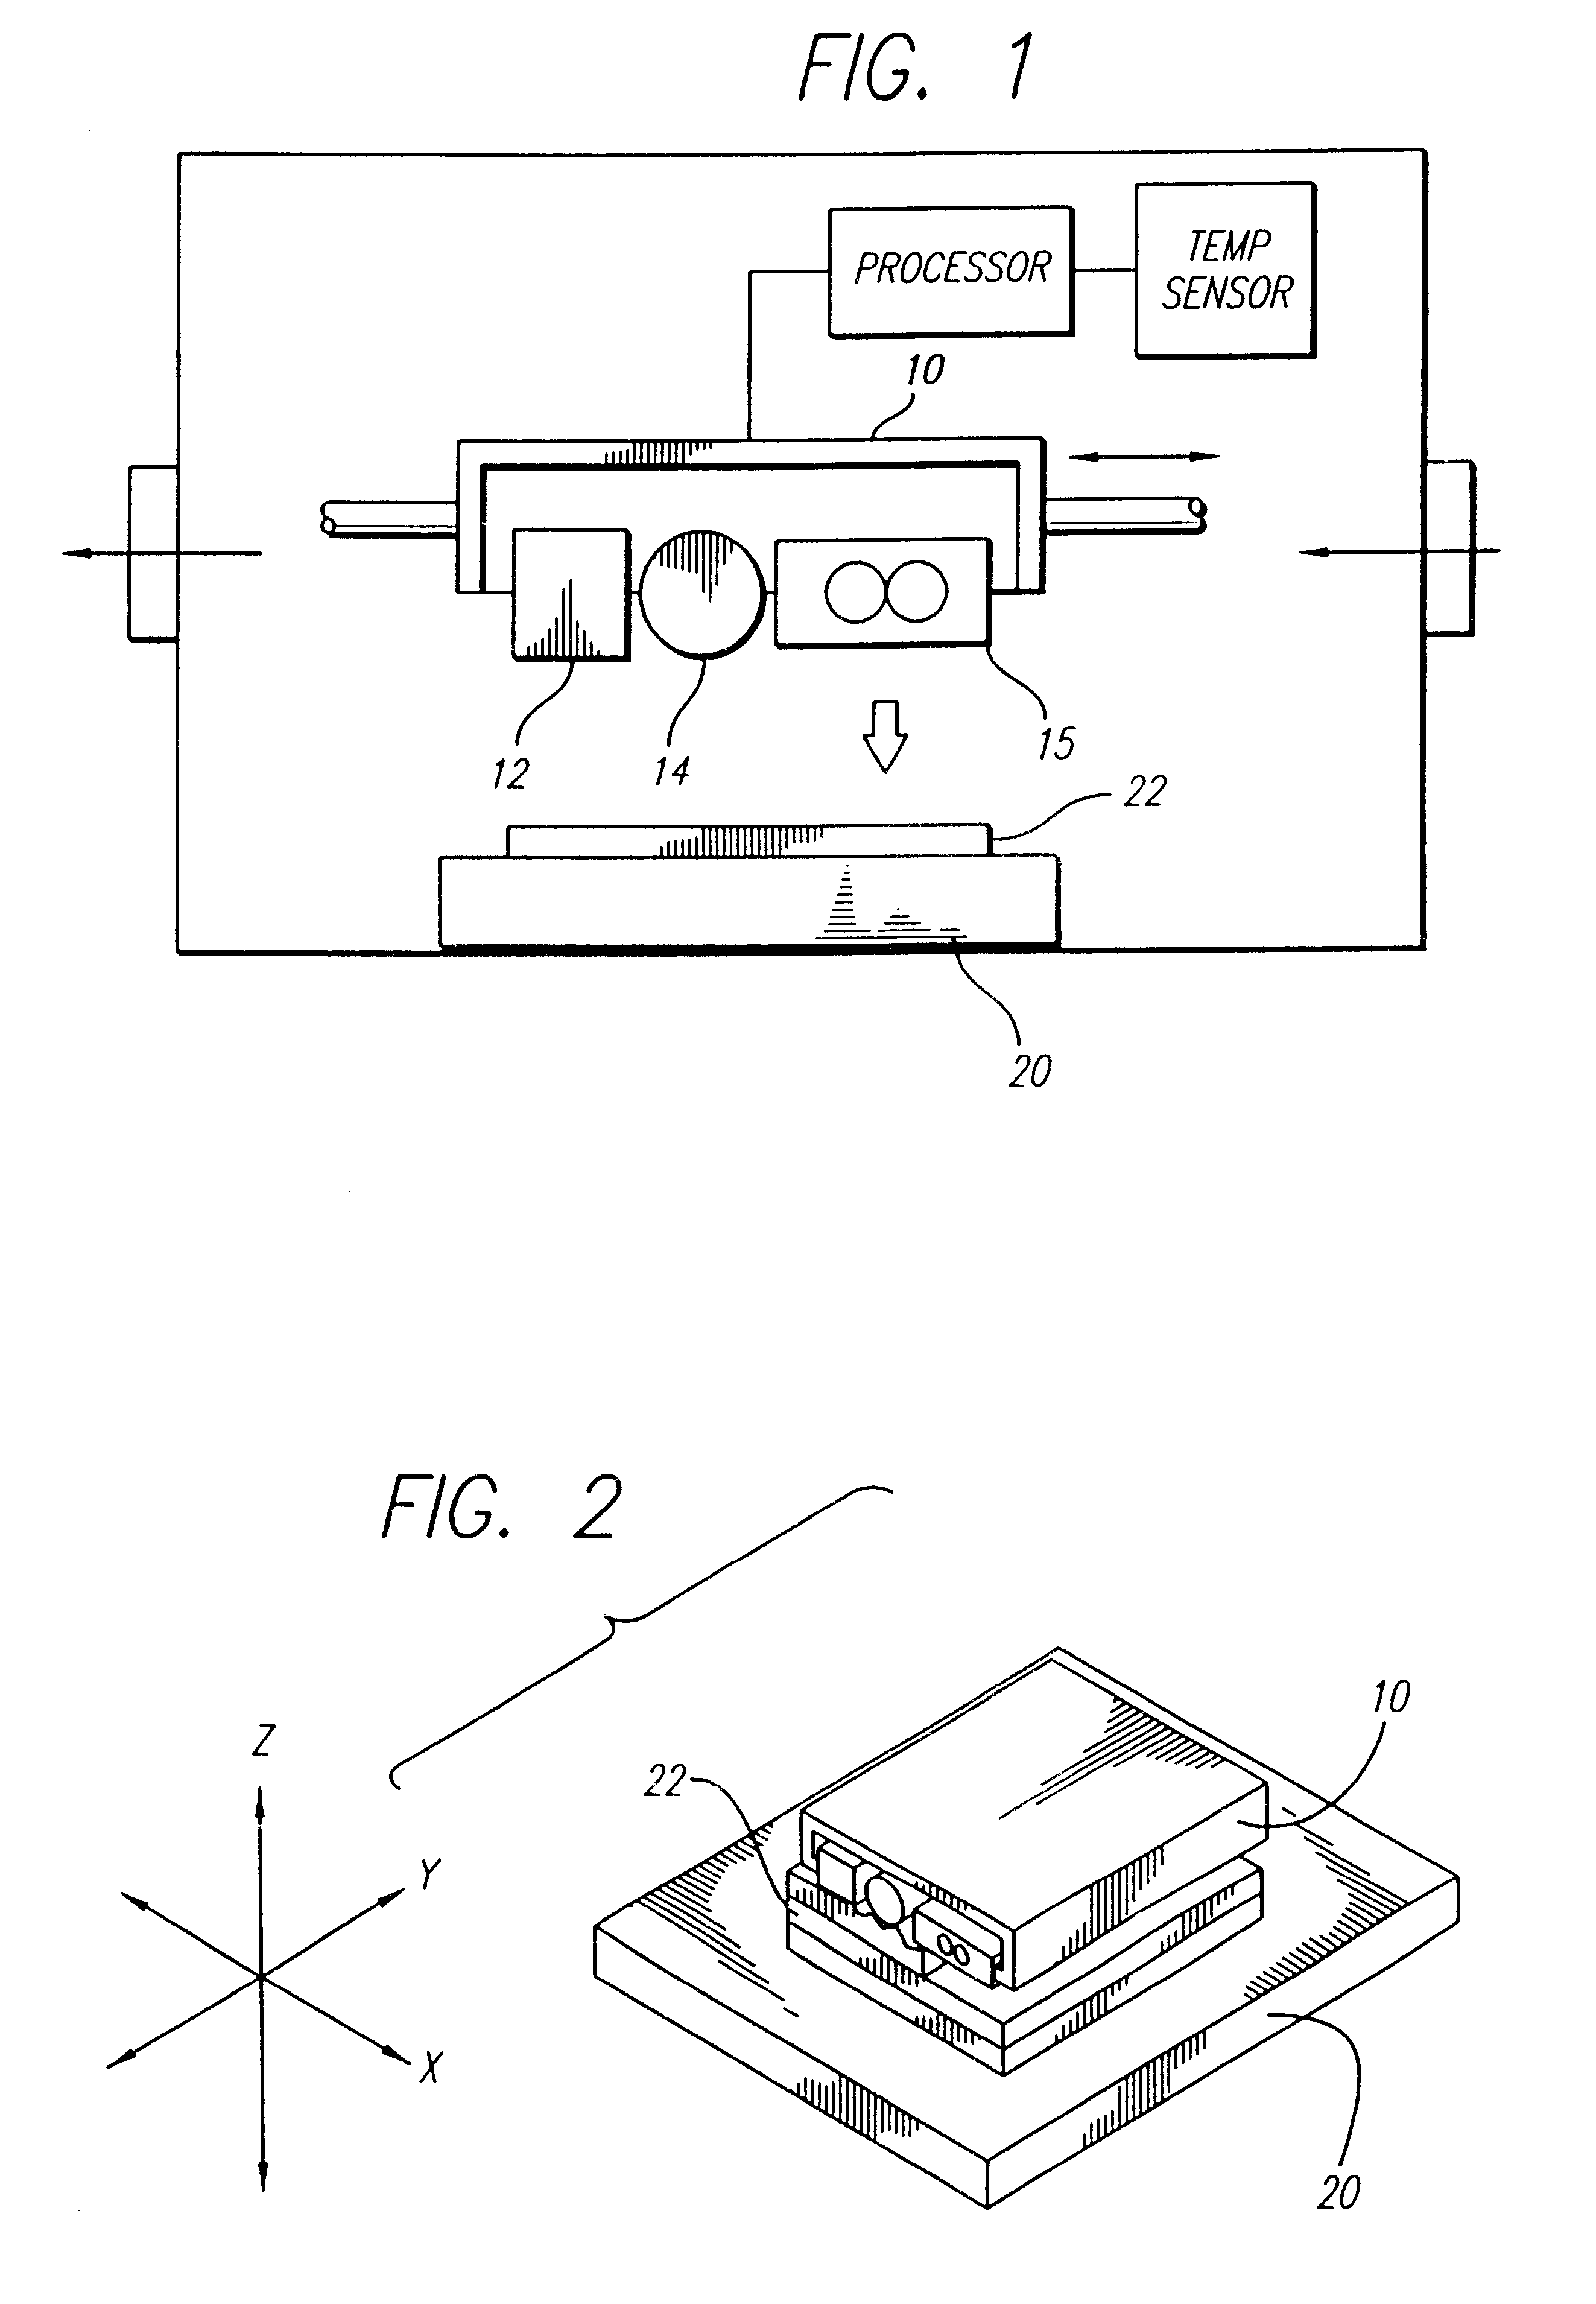 Method and apparatus for controlling the drop volume in a selective deposition modeling environment